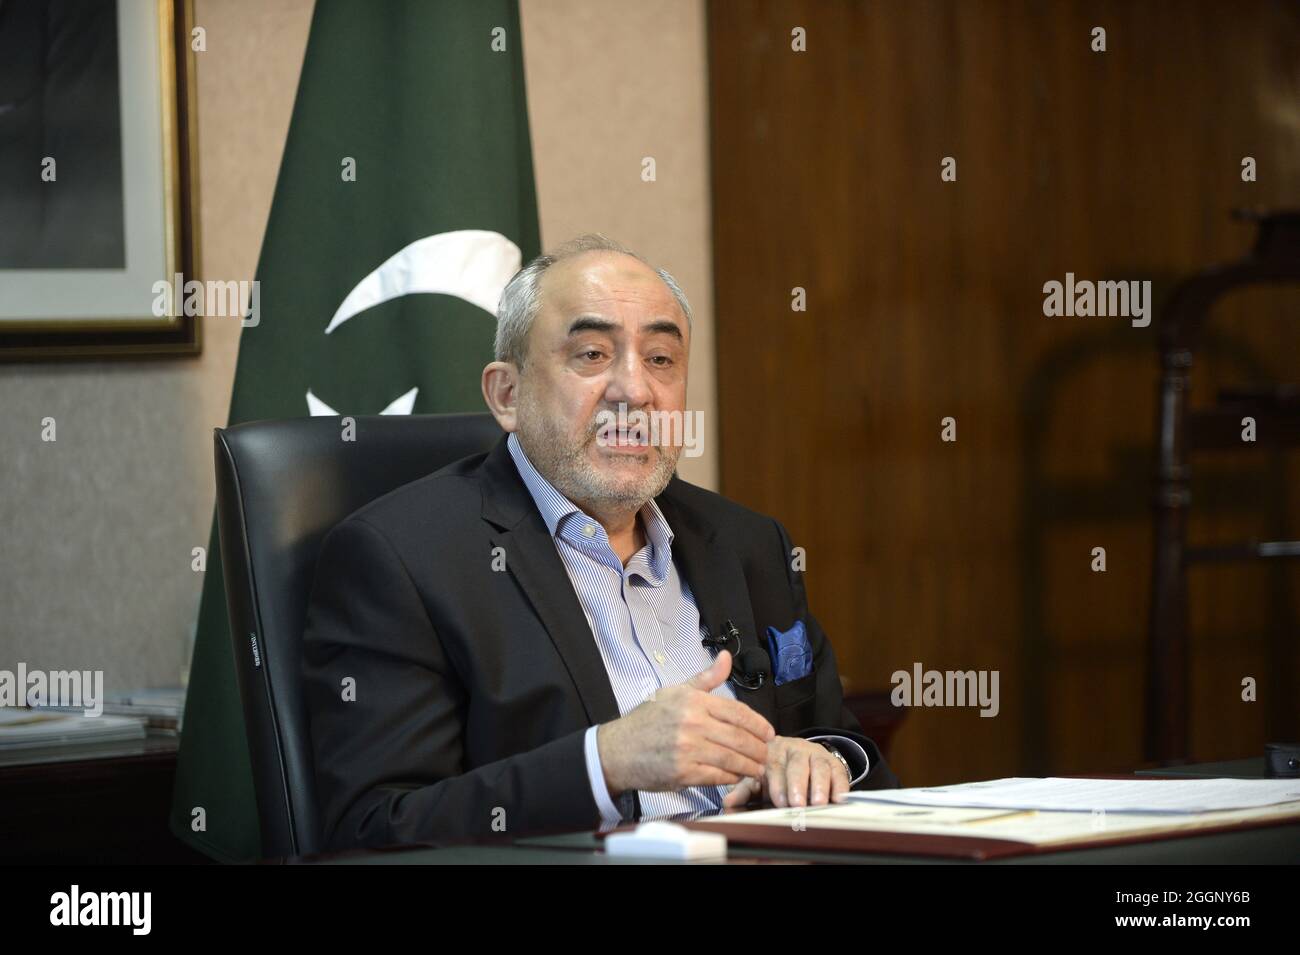 (210902) -- ISLAMABAD, Sept. 2, 2021 (Xinhua) -- Khalid Mansoor, special assistant to the Pakistani Prime Minister on China-Pakistan Economic Corridor (CPEC) affairs speaks during an interview with Chinese media in Islamabad, capital of Pakistan, on Sept. 1, 2021. The China-Pakistan Economic Corridor (CPEC), a flagship project of the China-proposed Belt and Road Initiative (BRI), is one of the most important projects for the economic revival of Pakistan, said Khalid Mansoor, special assistant to the Pakistani Prime Minister on CPEC affairs. TO GO WITH 'Interview: CPEC to play pivotal role Stock Photo